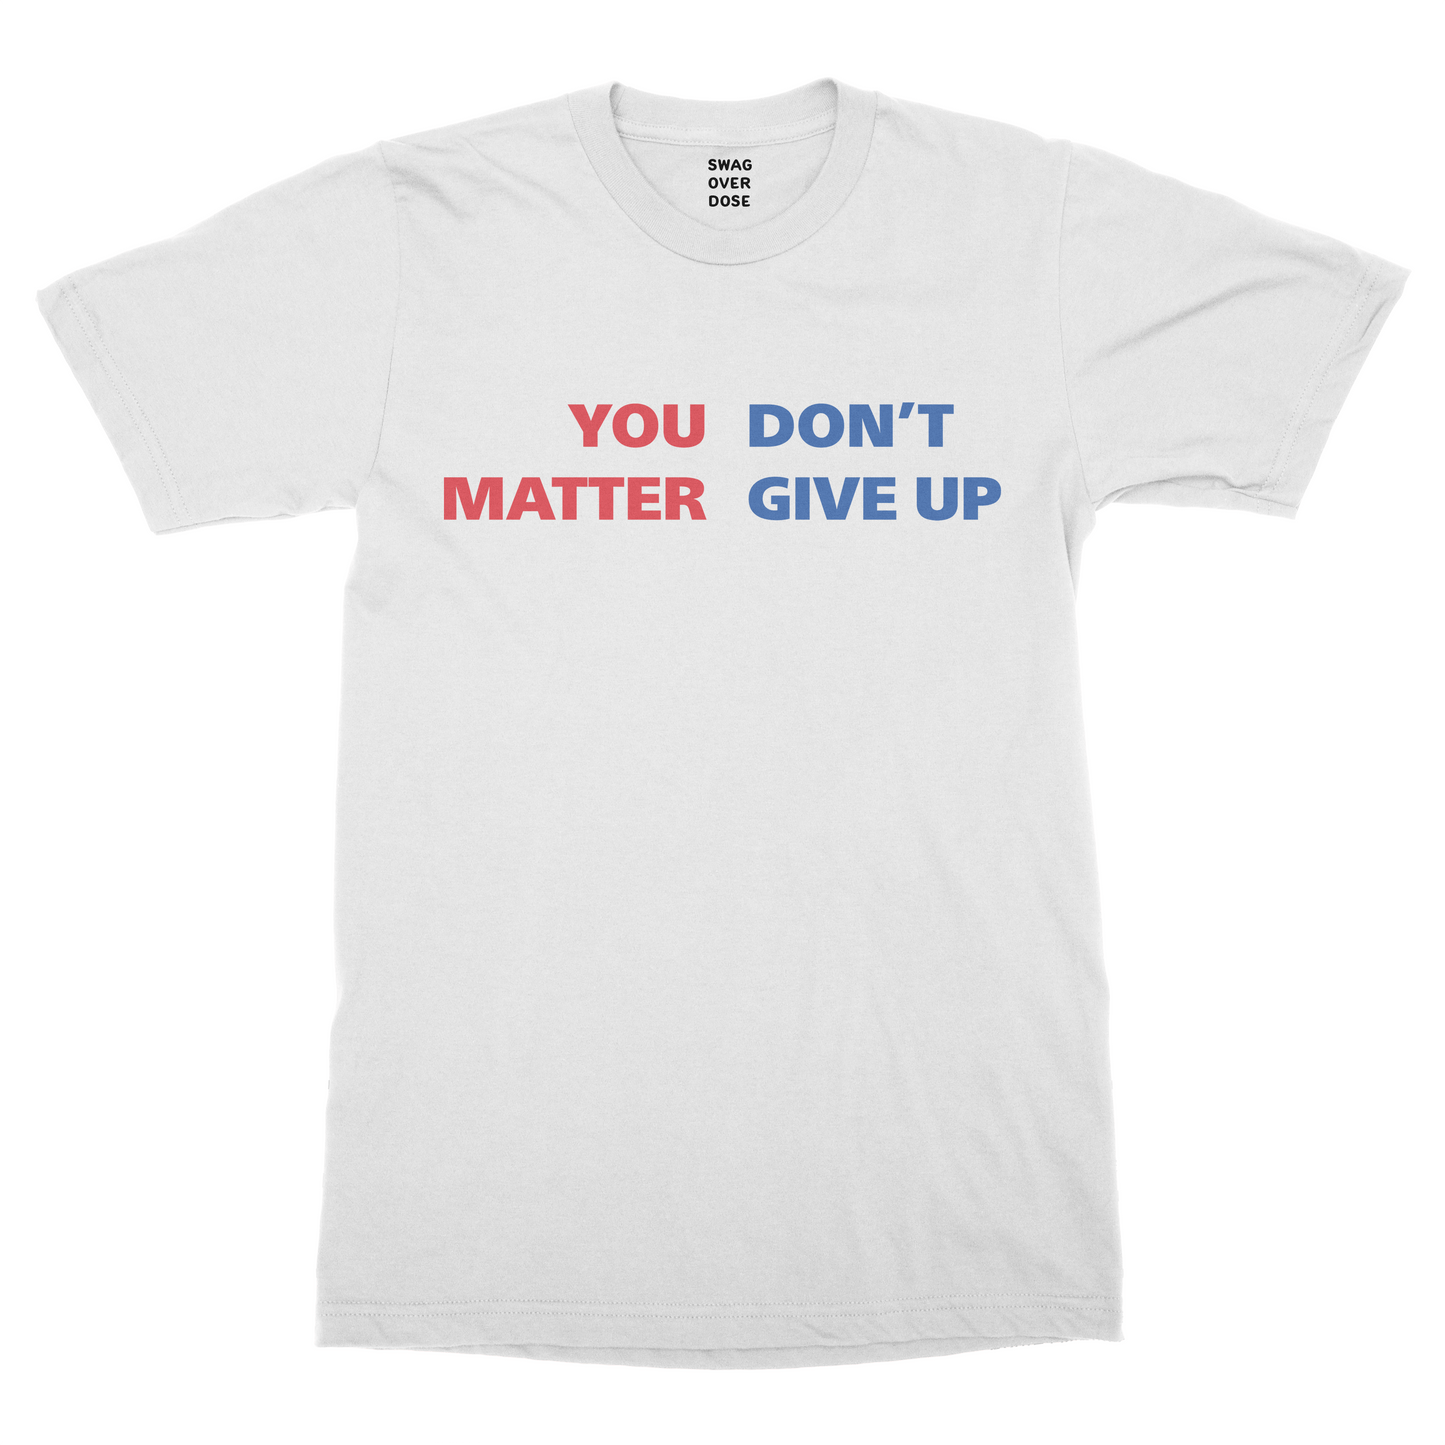 You Matter, Don't Give Up T-Shirt